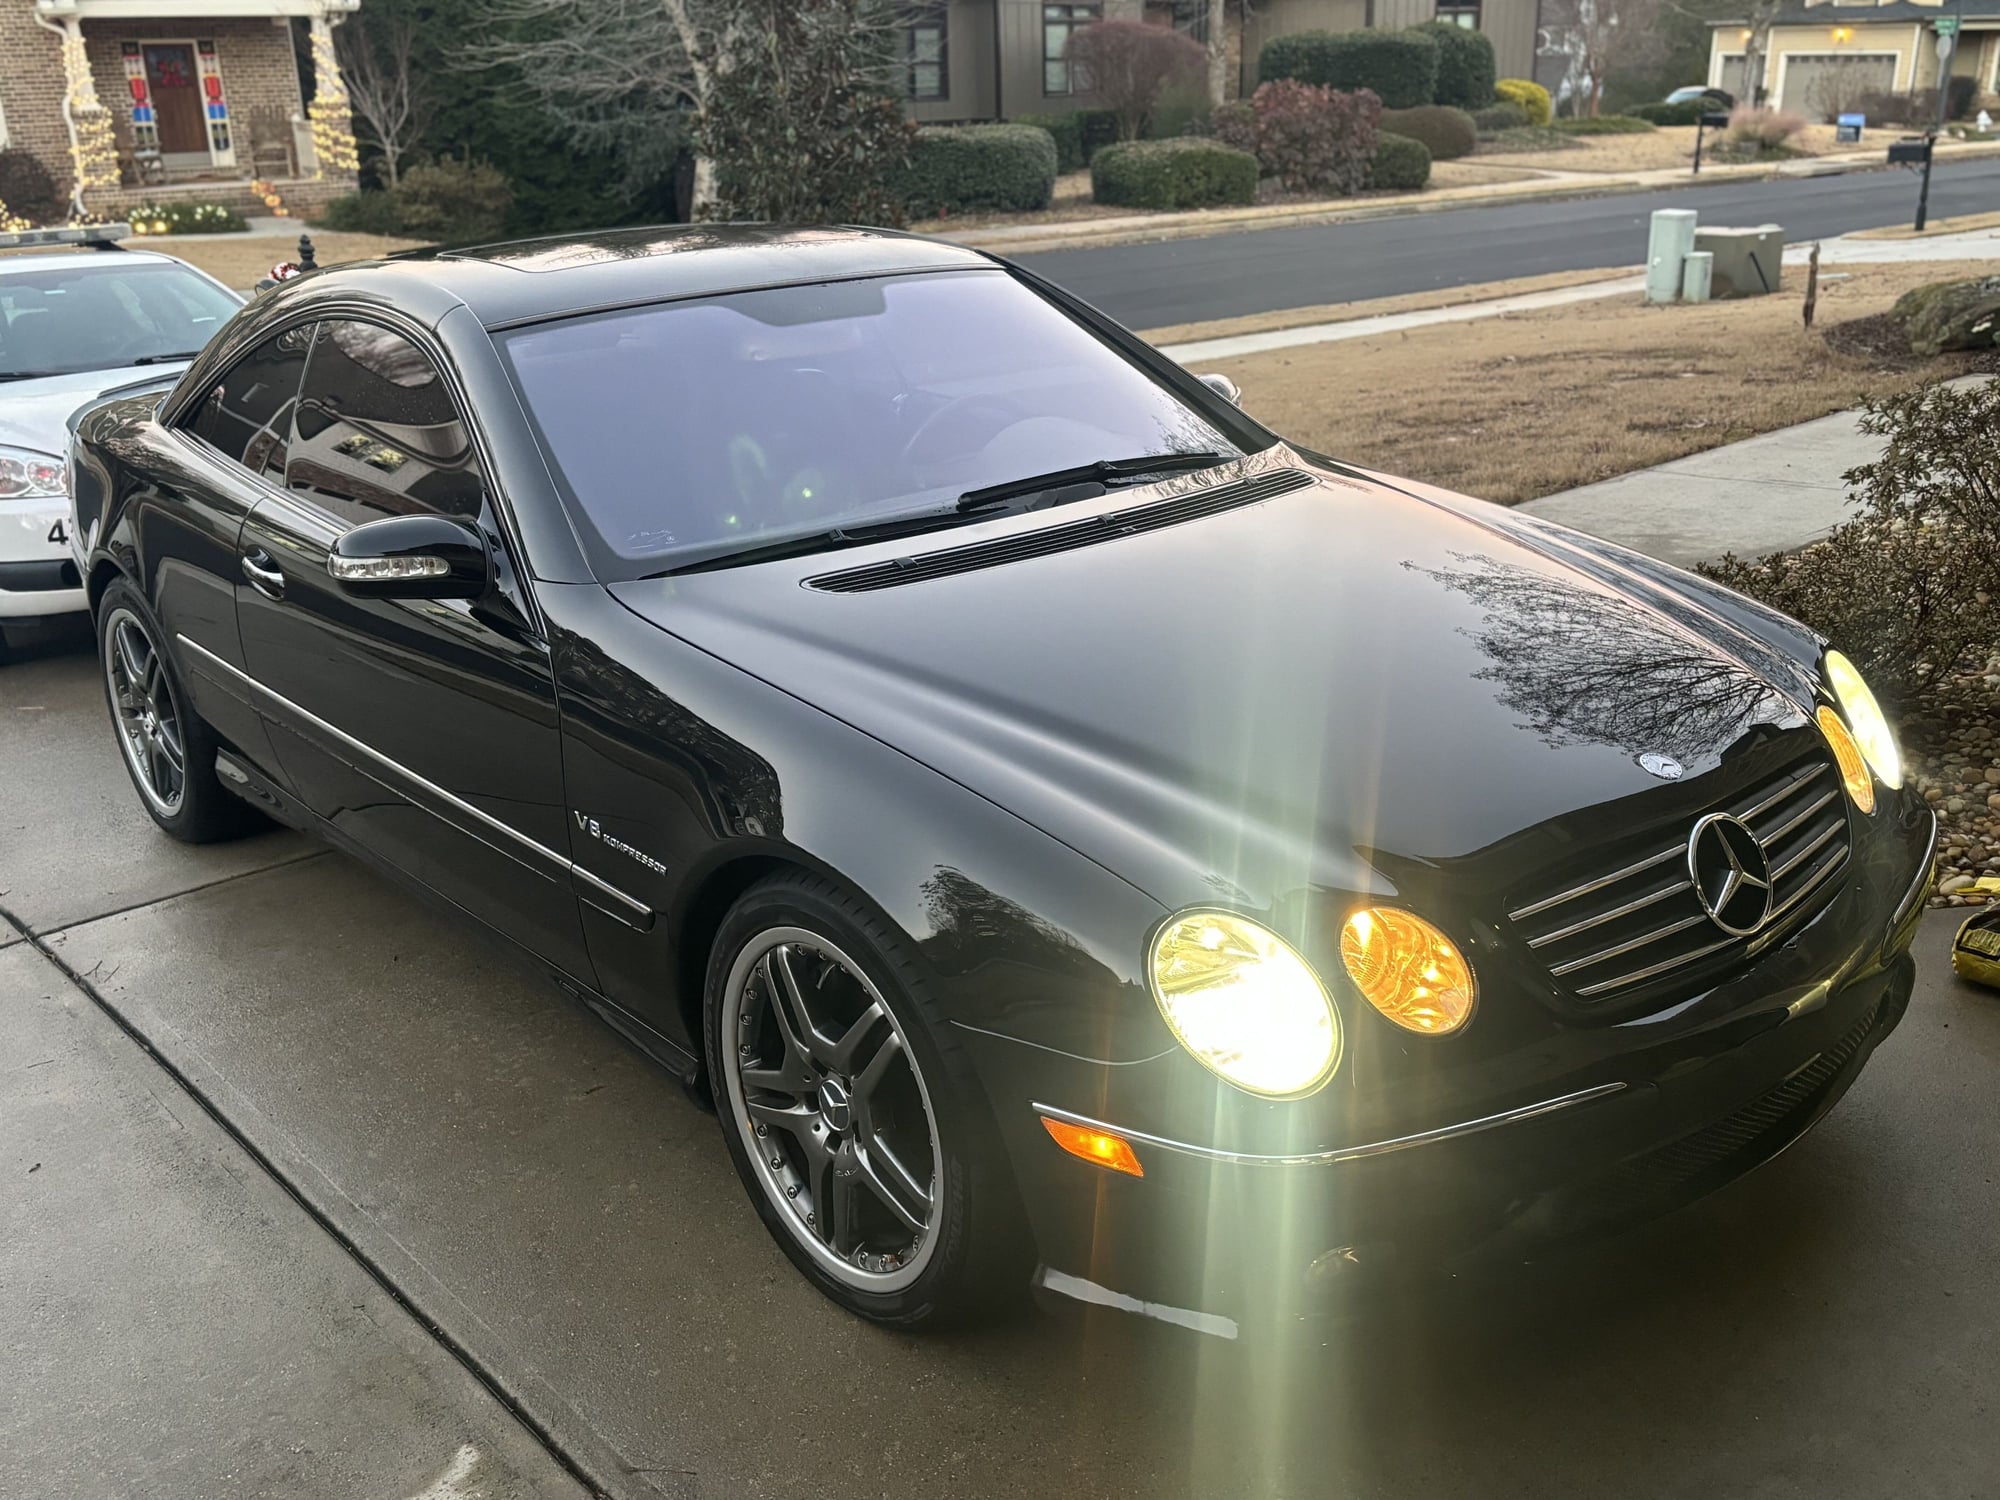 2004 Mercedes-Benz CL55 AMG - 2004 CL55 65k Miles 17k - Used - VIN WDBPJ74J64A043215 - 65,000 Miles - 8 cyl - 2WD - Automatic - Coupe - Black - Dacula, GA 30019, United States